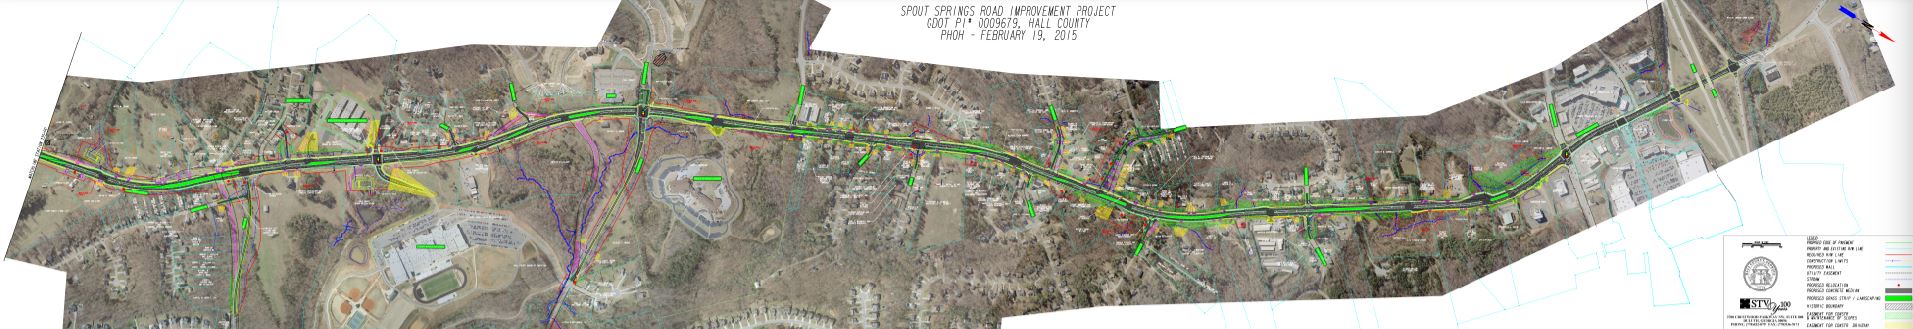 Spout Springs RD Widening Map 2